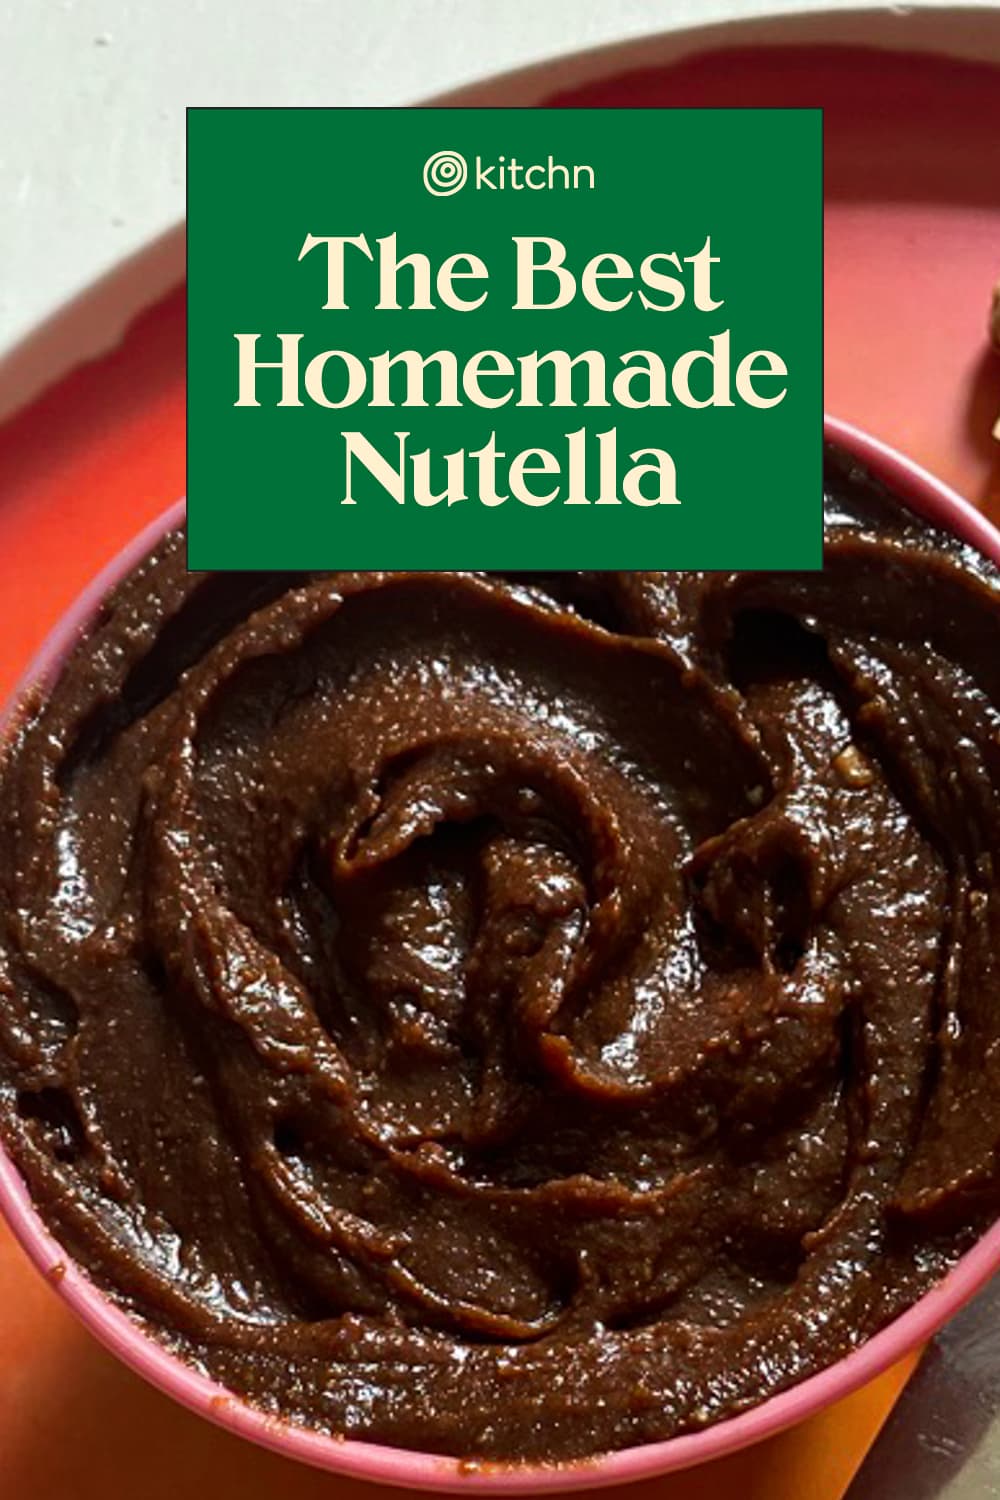 The Best Homemade Nutella